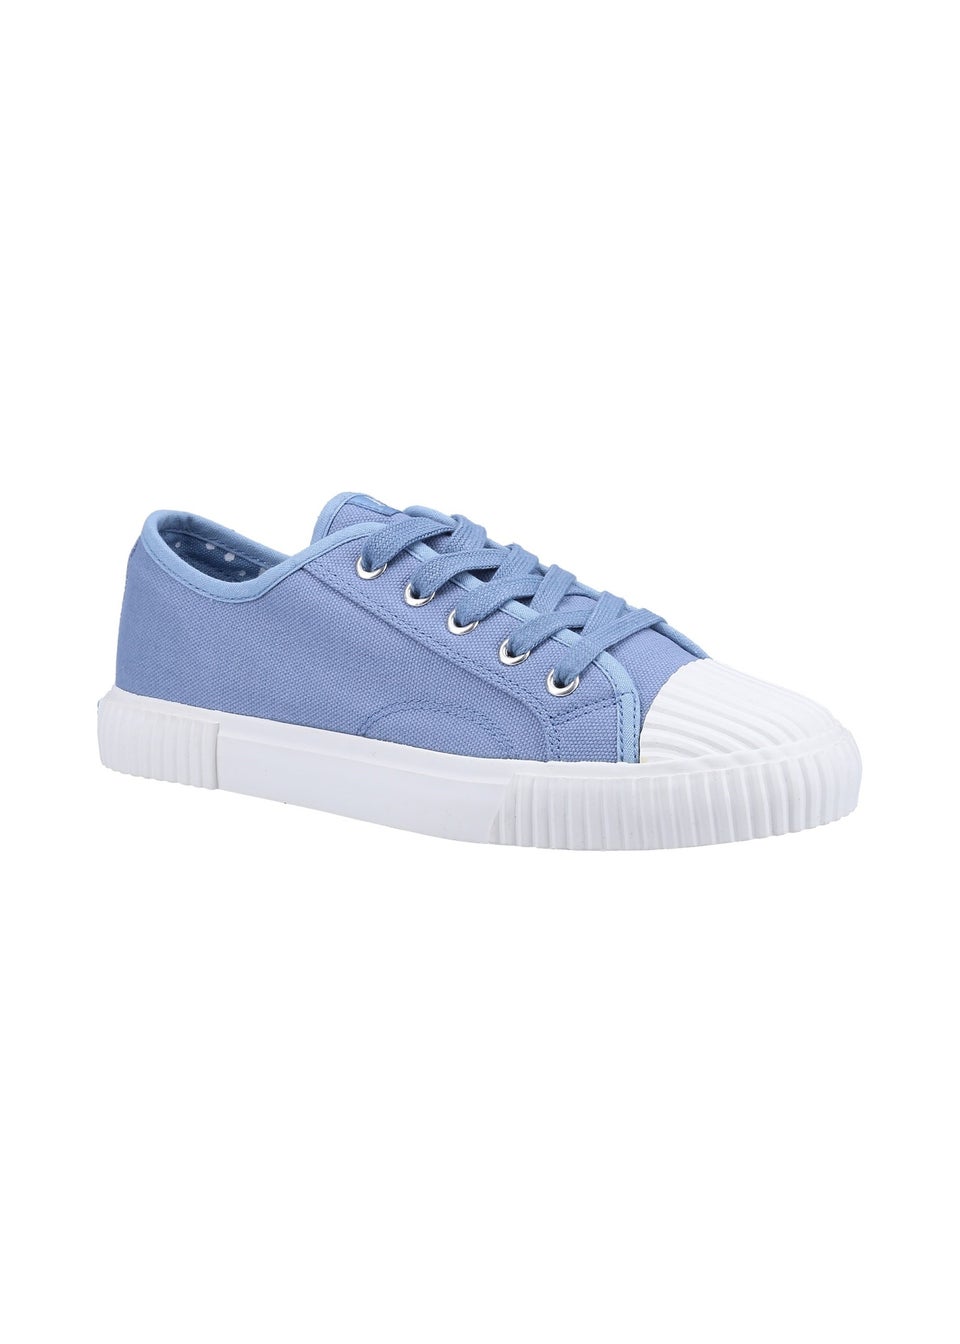 Hush Puppies Blue Brooke Canvas Trainer